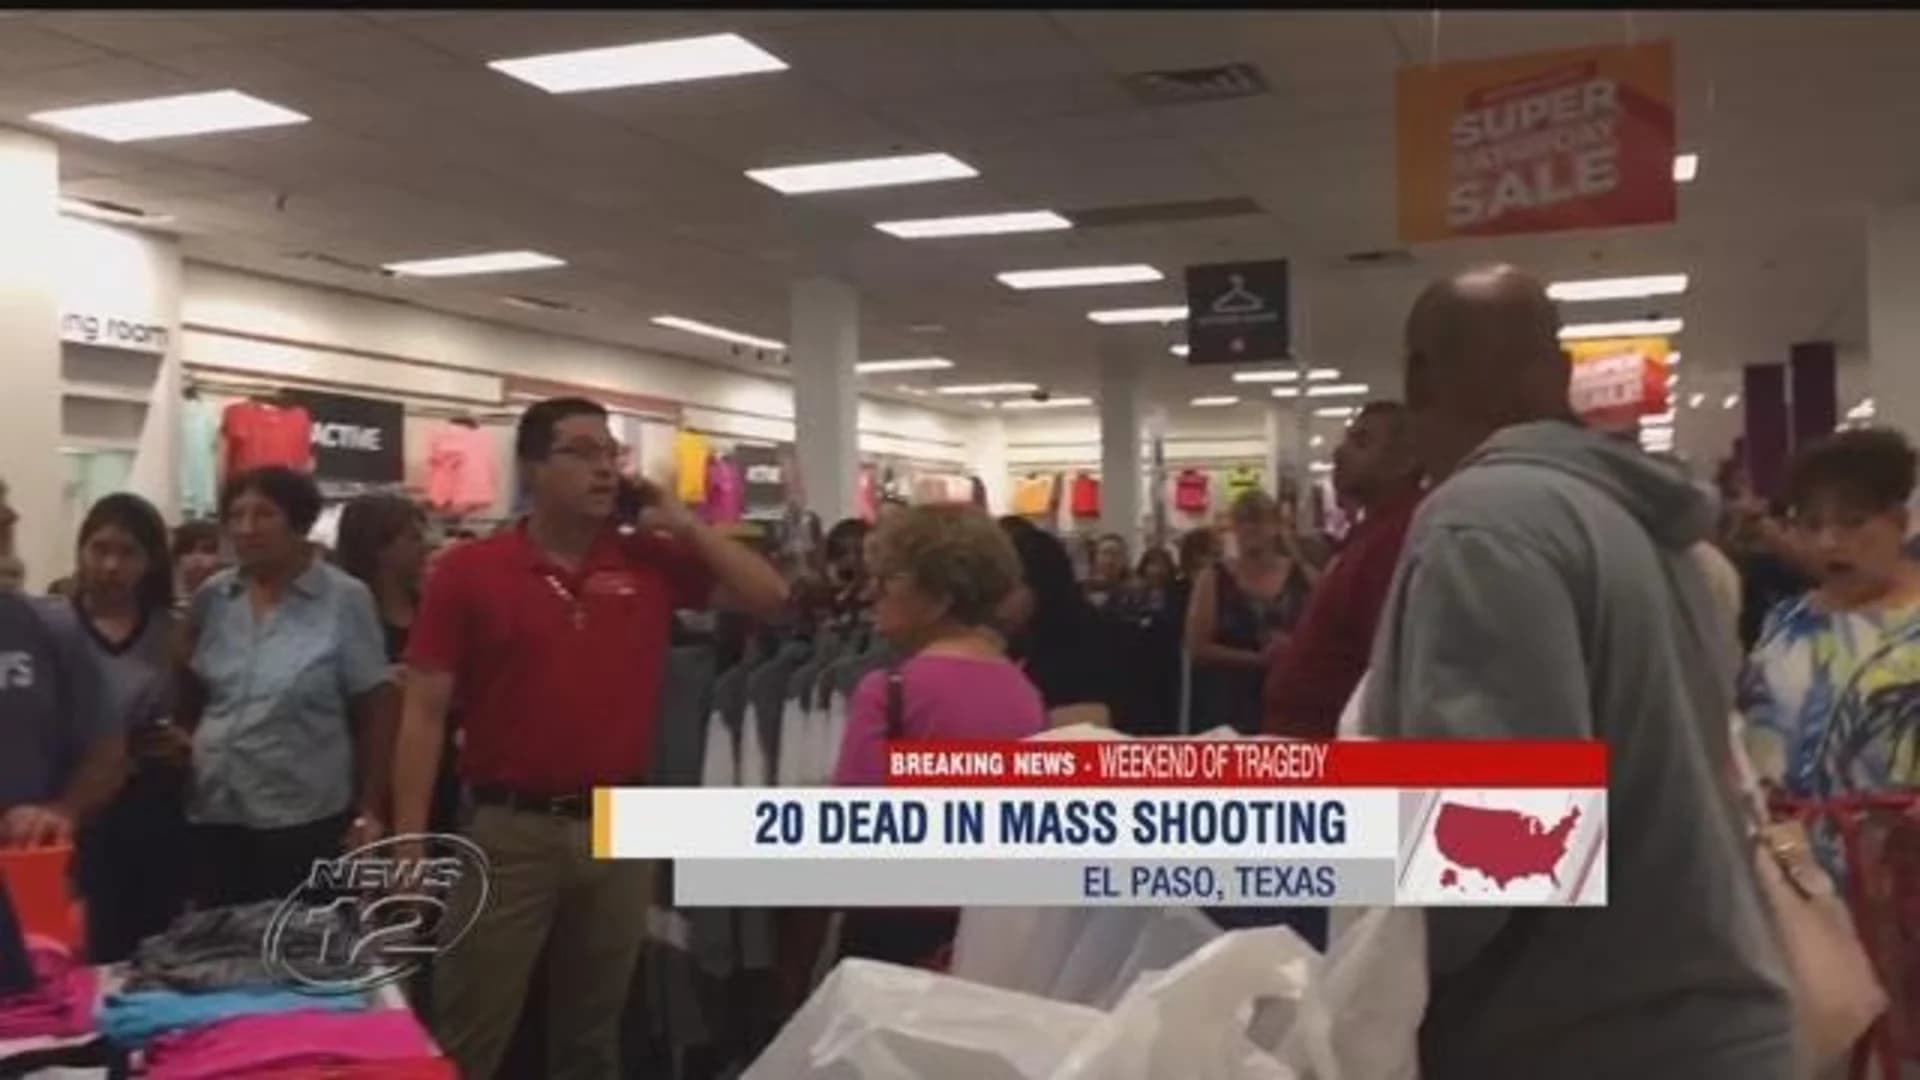 Attack on Texas shoppers to be handled as domestic terrorism